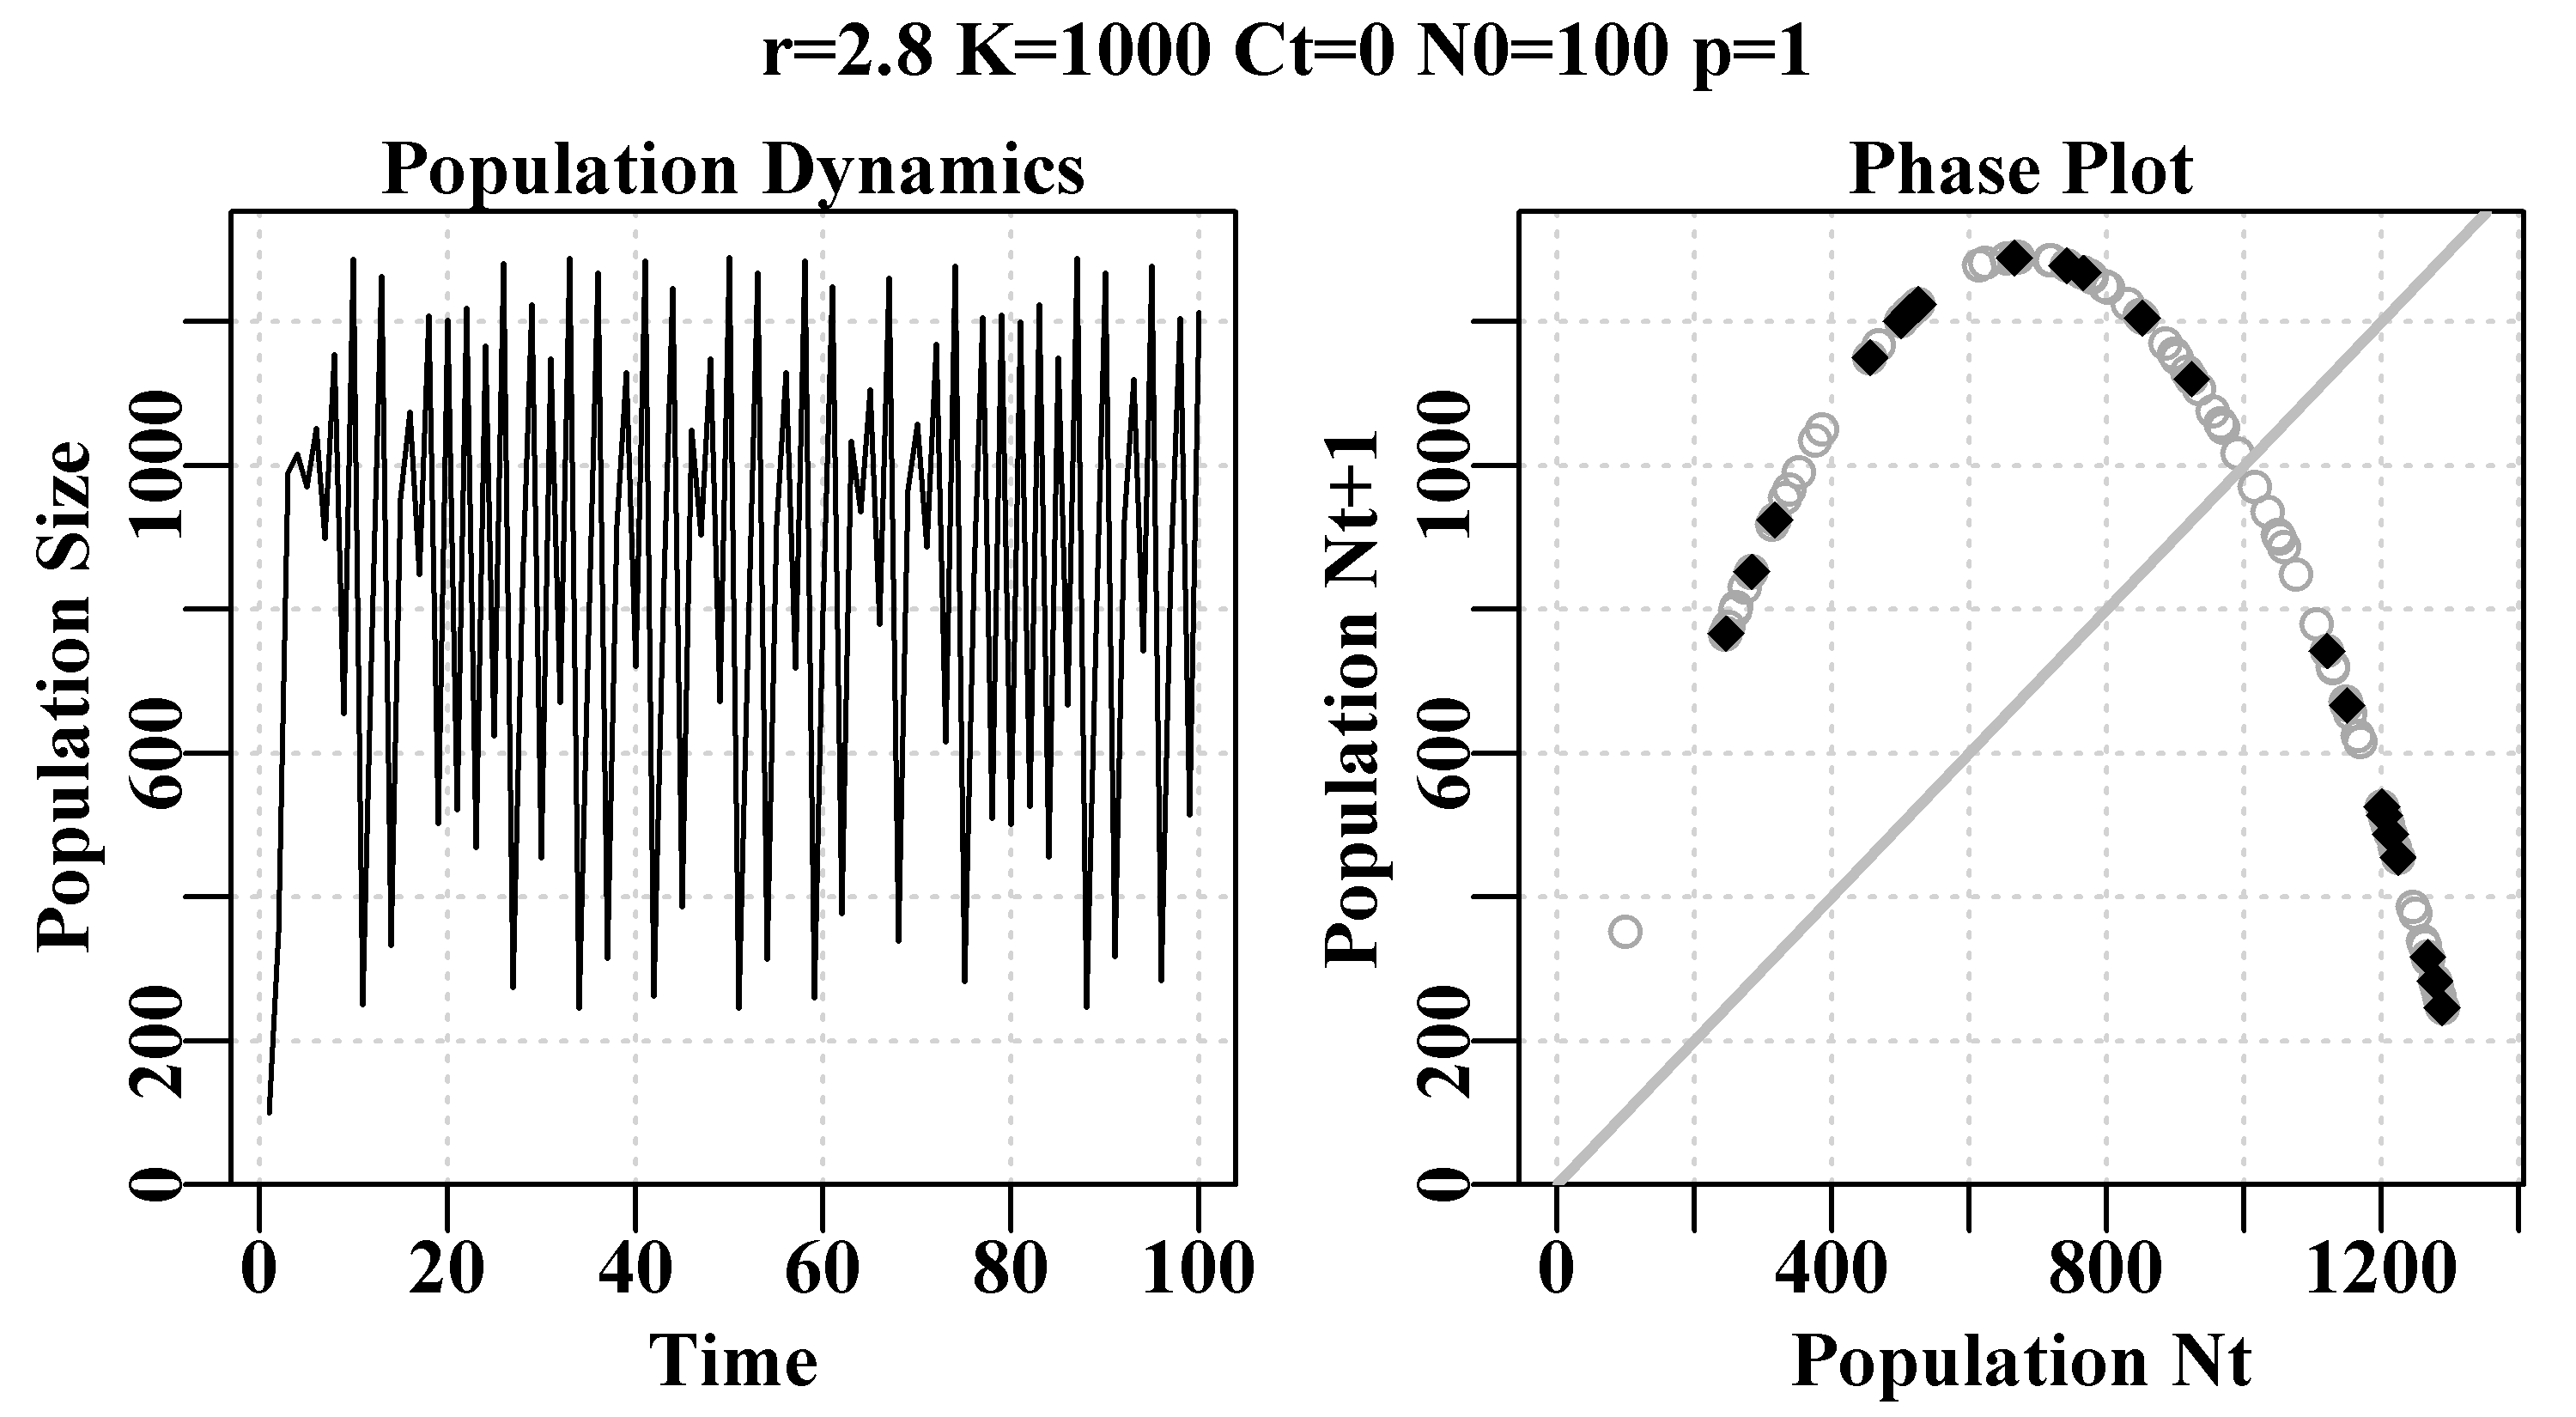 Schaefer model dynamics. The left plot is the numbers by year, illustrating chaotic dynamics from an r-value of 2.8. The right plot is numbers-at-time t+1 against time t, known as a phase plot. The final 20% of points are in red to illustrate any equilibrium behaviour. The grey diagonal is the 1:1 line.